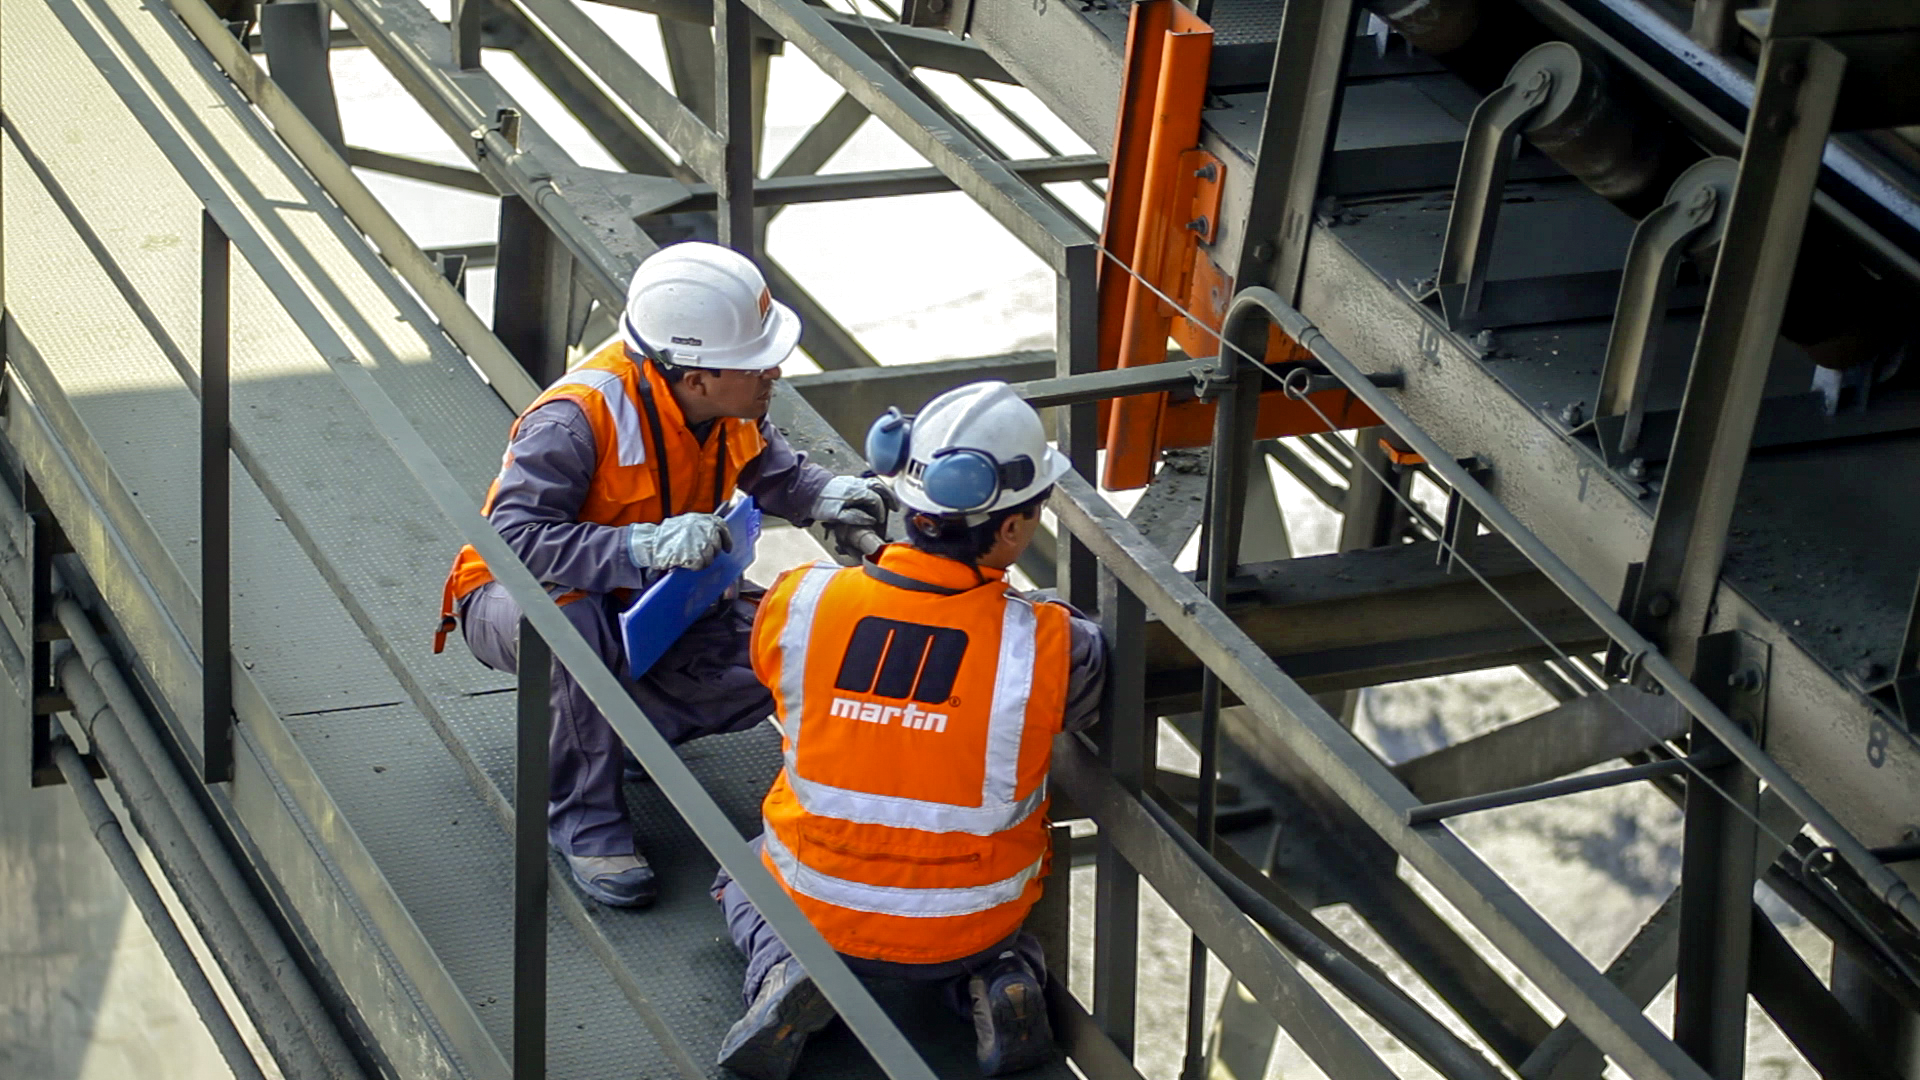 Workers inspecting a belt conveyor system.